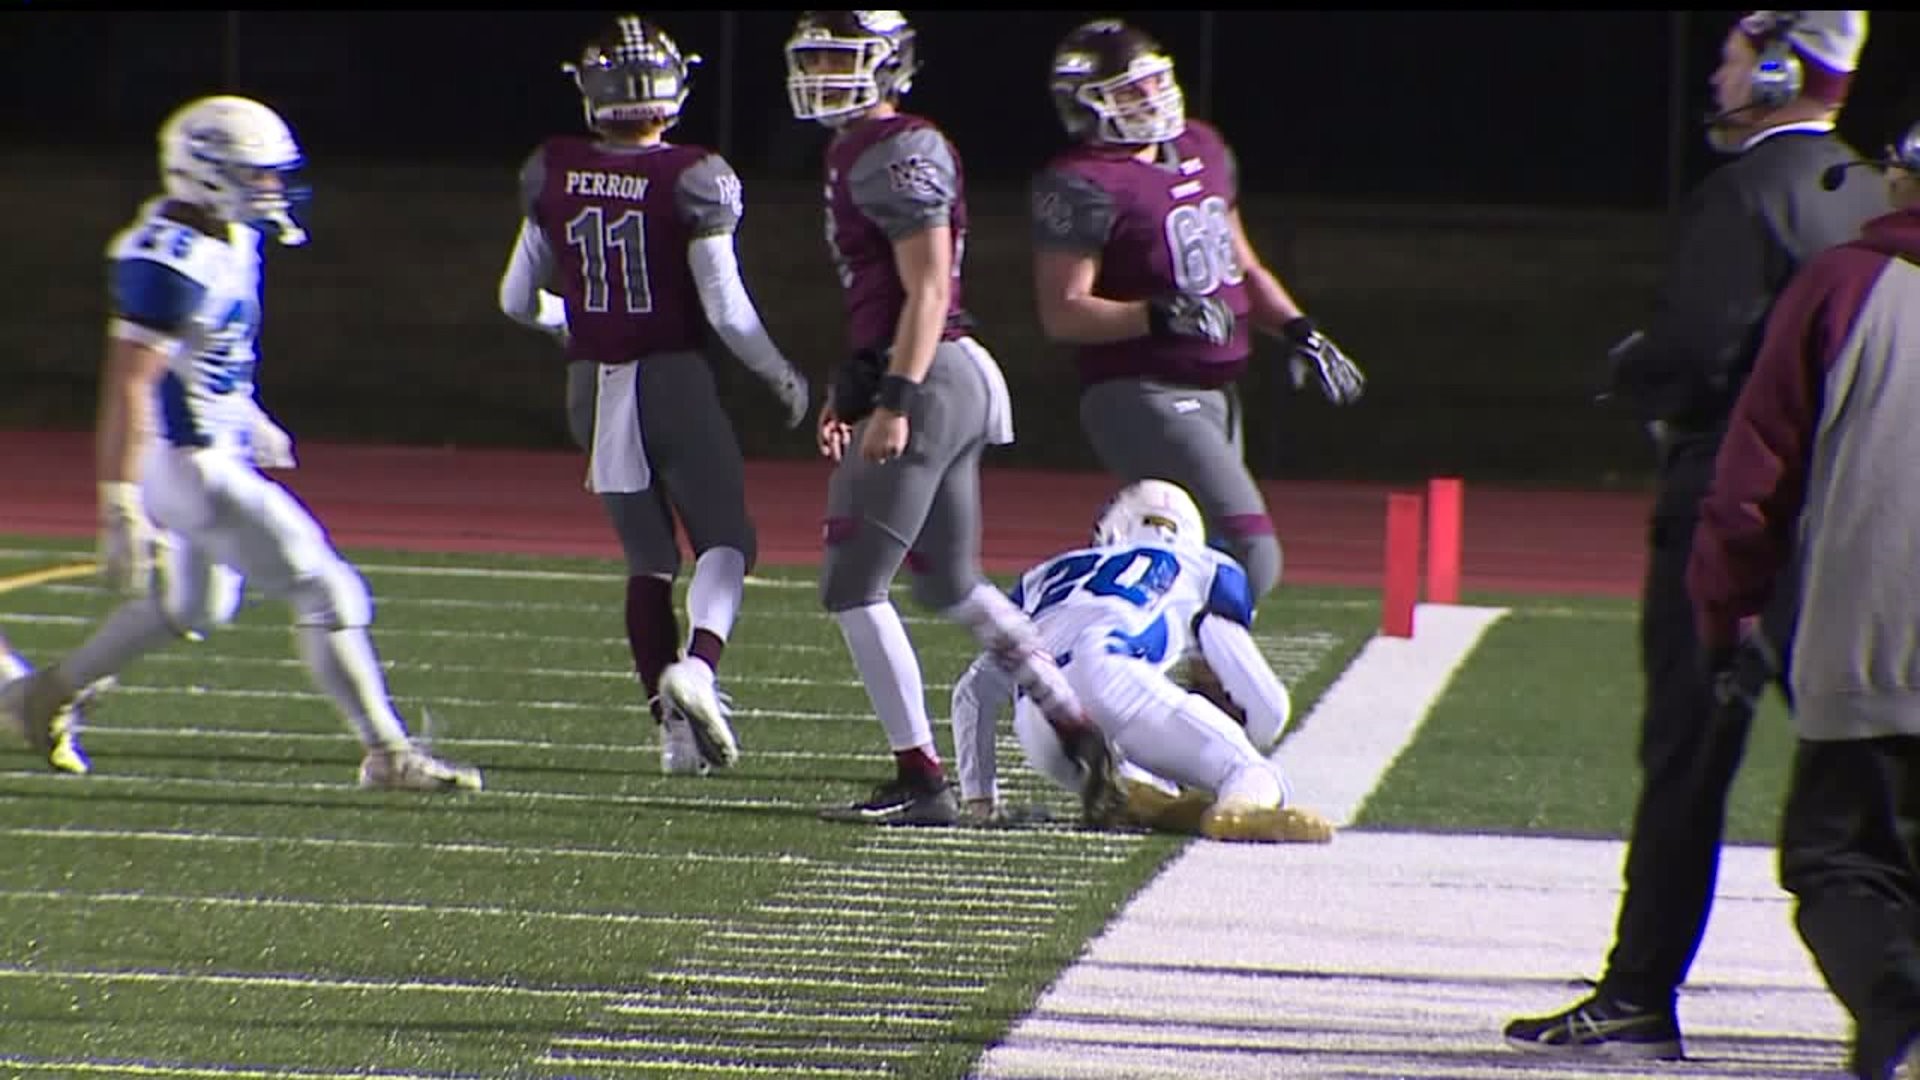 HSFF 2018 week 14 Cocalico vs Manheim Central (District 5A Championship) highlights